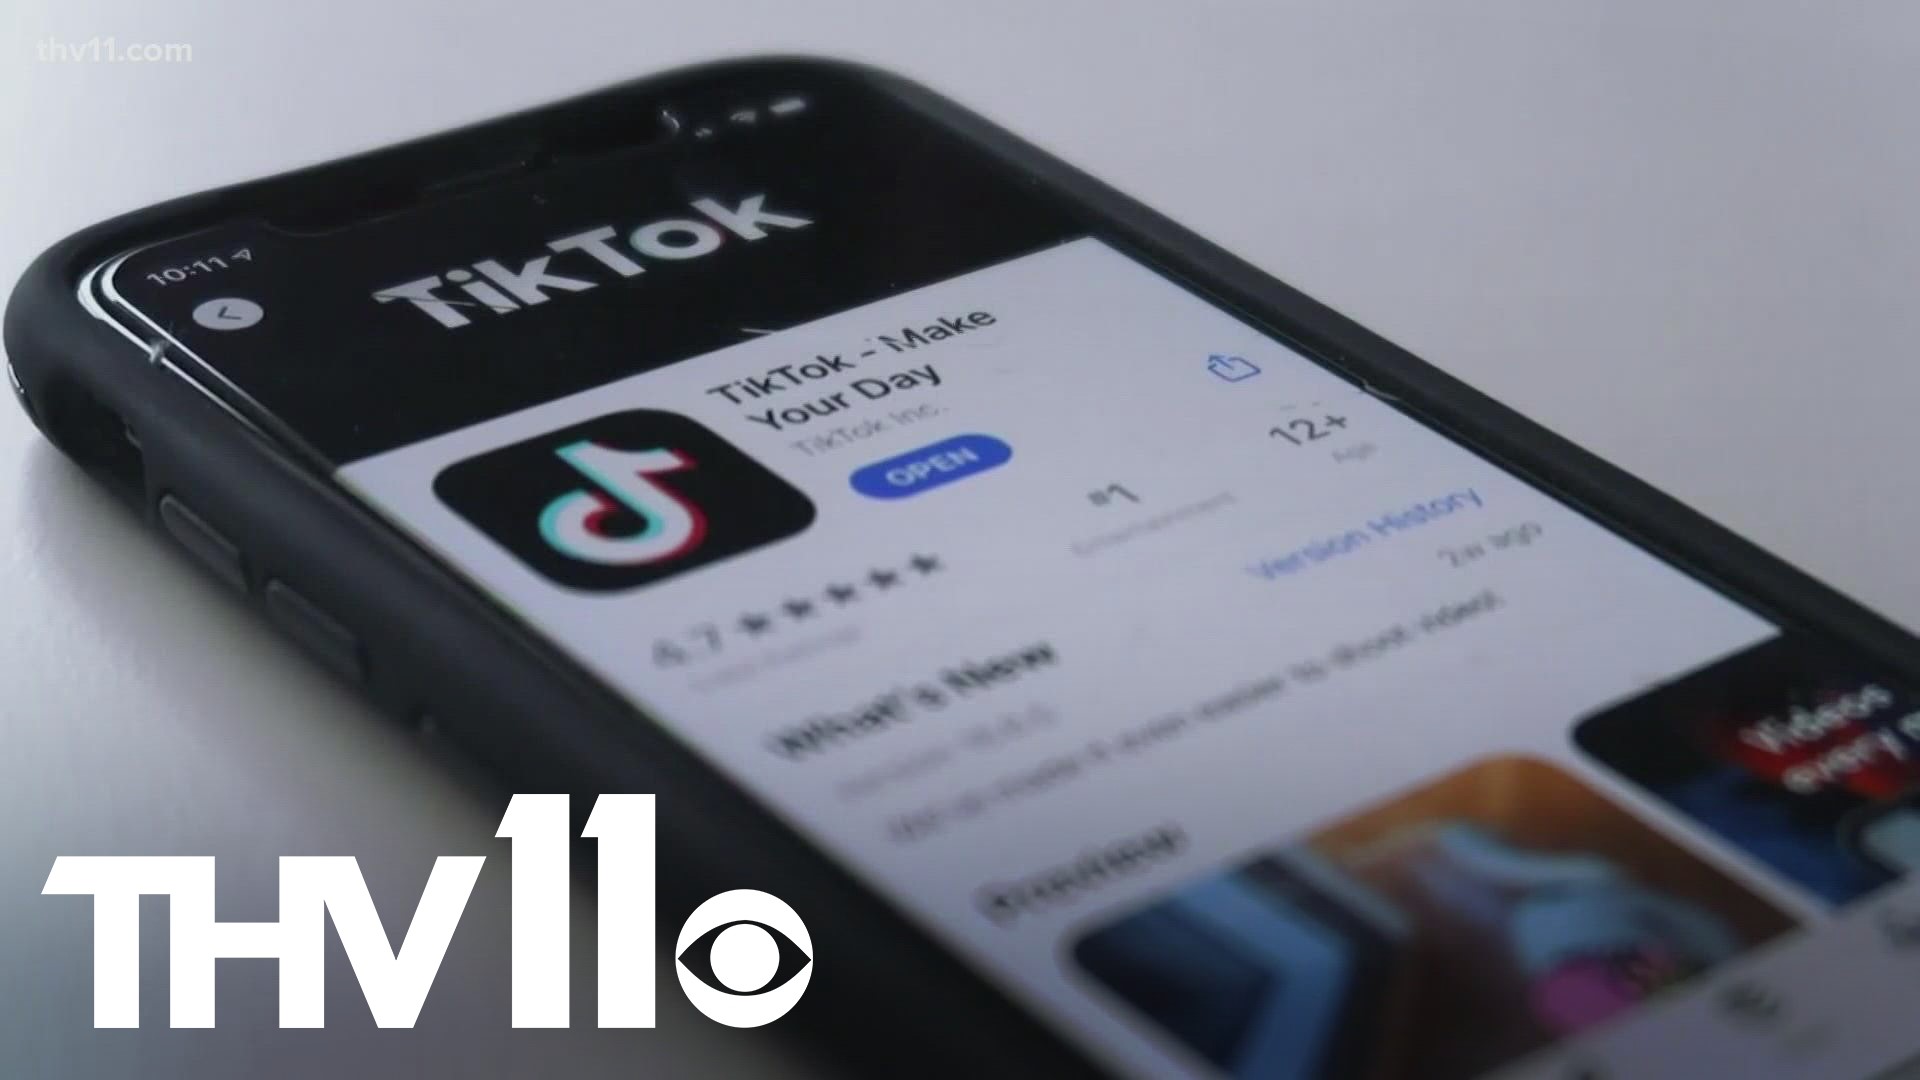 Arkansas Tech joins a running list of universities that have banned the popular app TikTok on their campus networks, citing potential privacy risks.